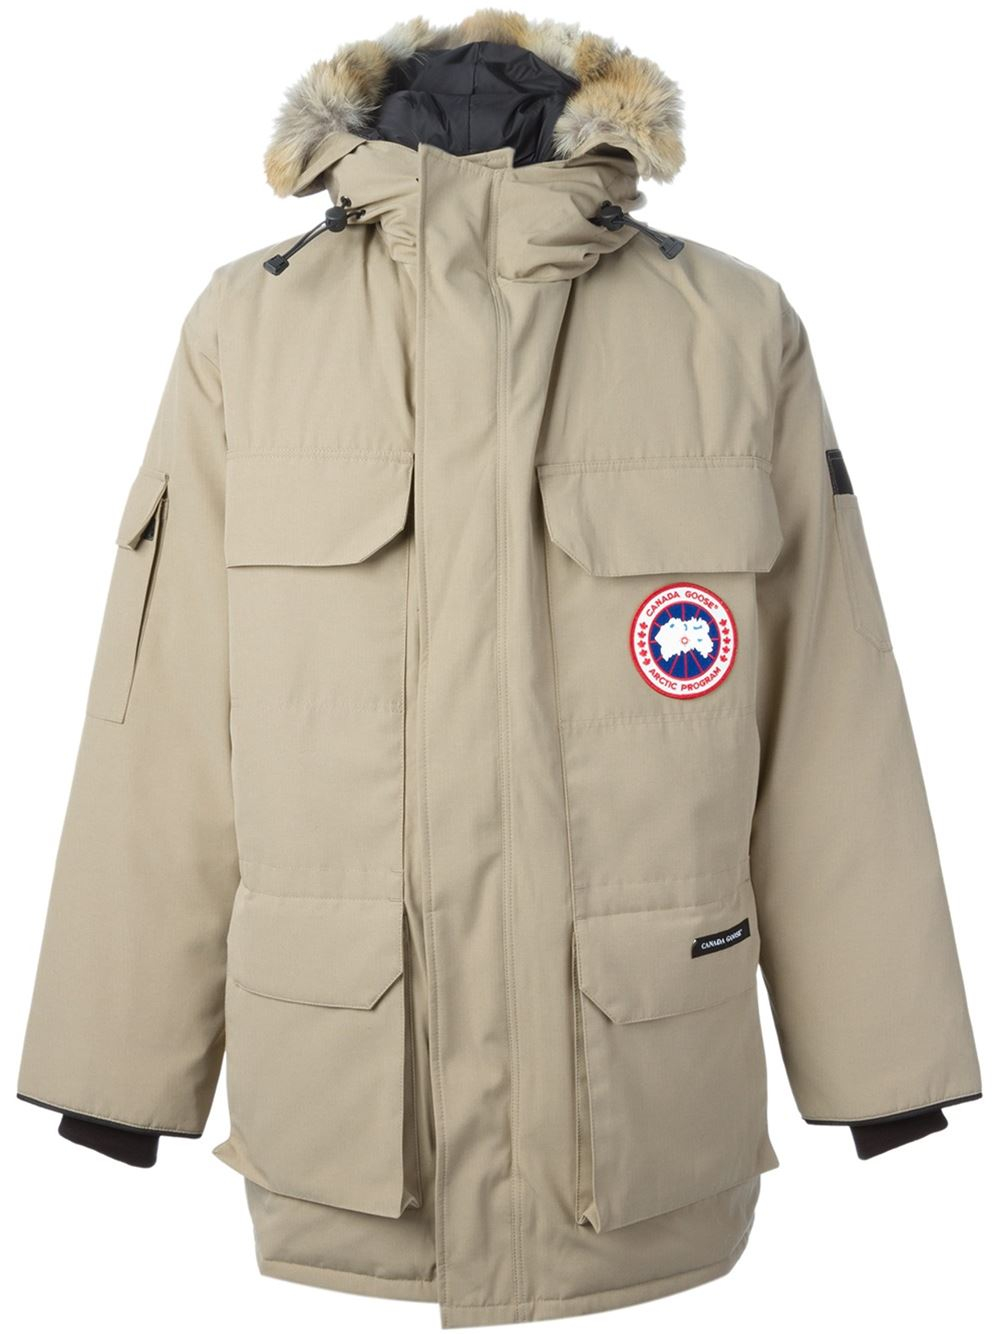 Lyst - Canada goose 'Expedition' Parka in Brown for Men